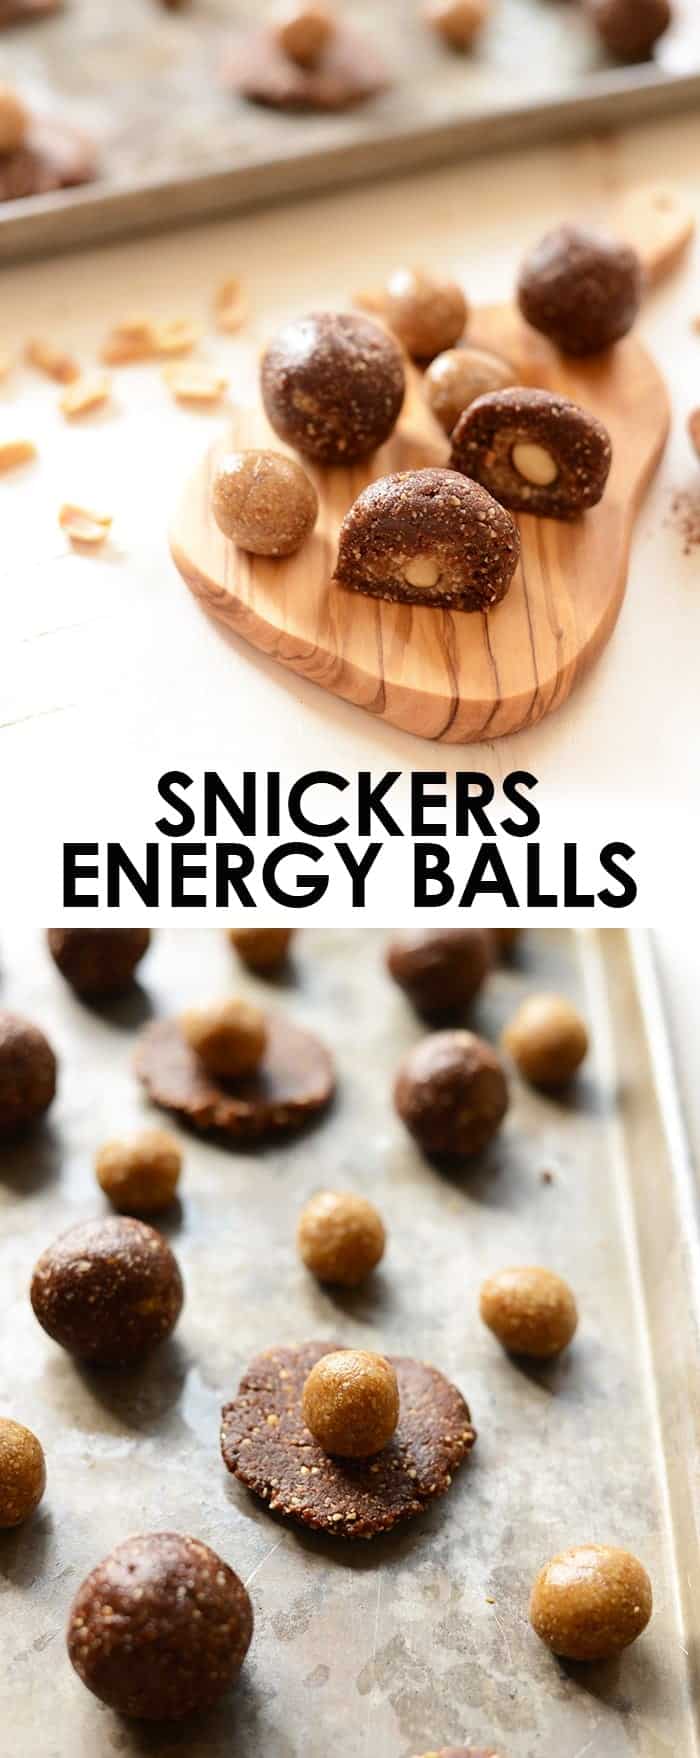 Need a break? Grab a Snickers Energy Ball! These little morsels of heaven are made with real ingredients and free of gluten, grains, and dairy!